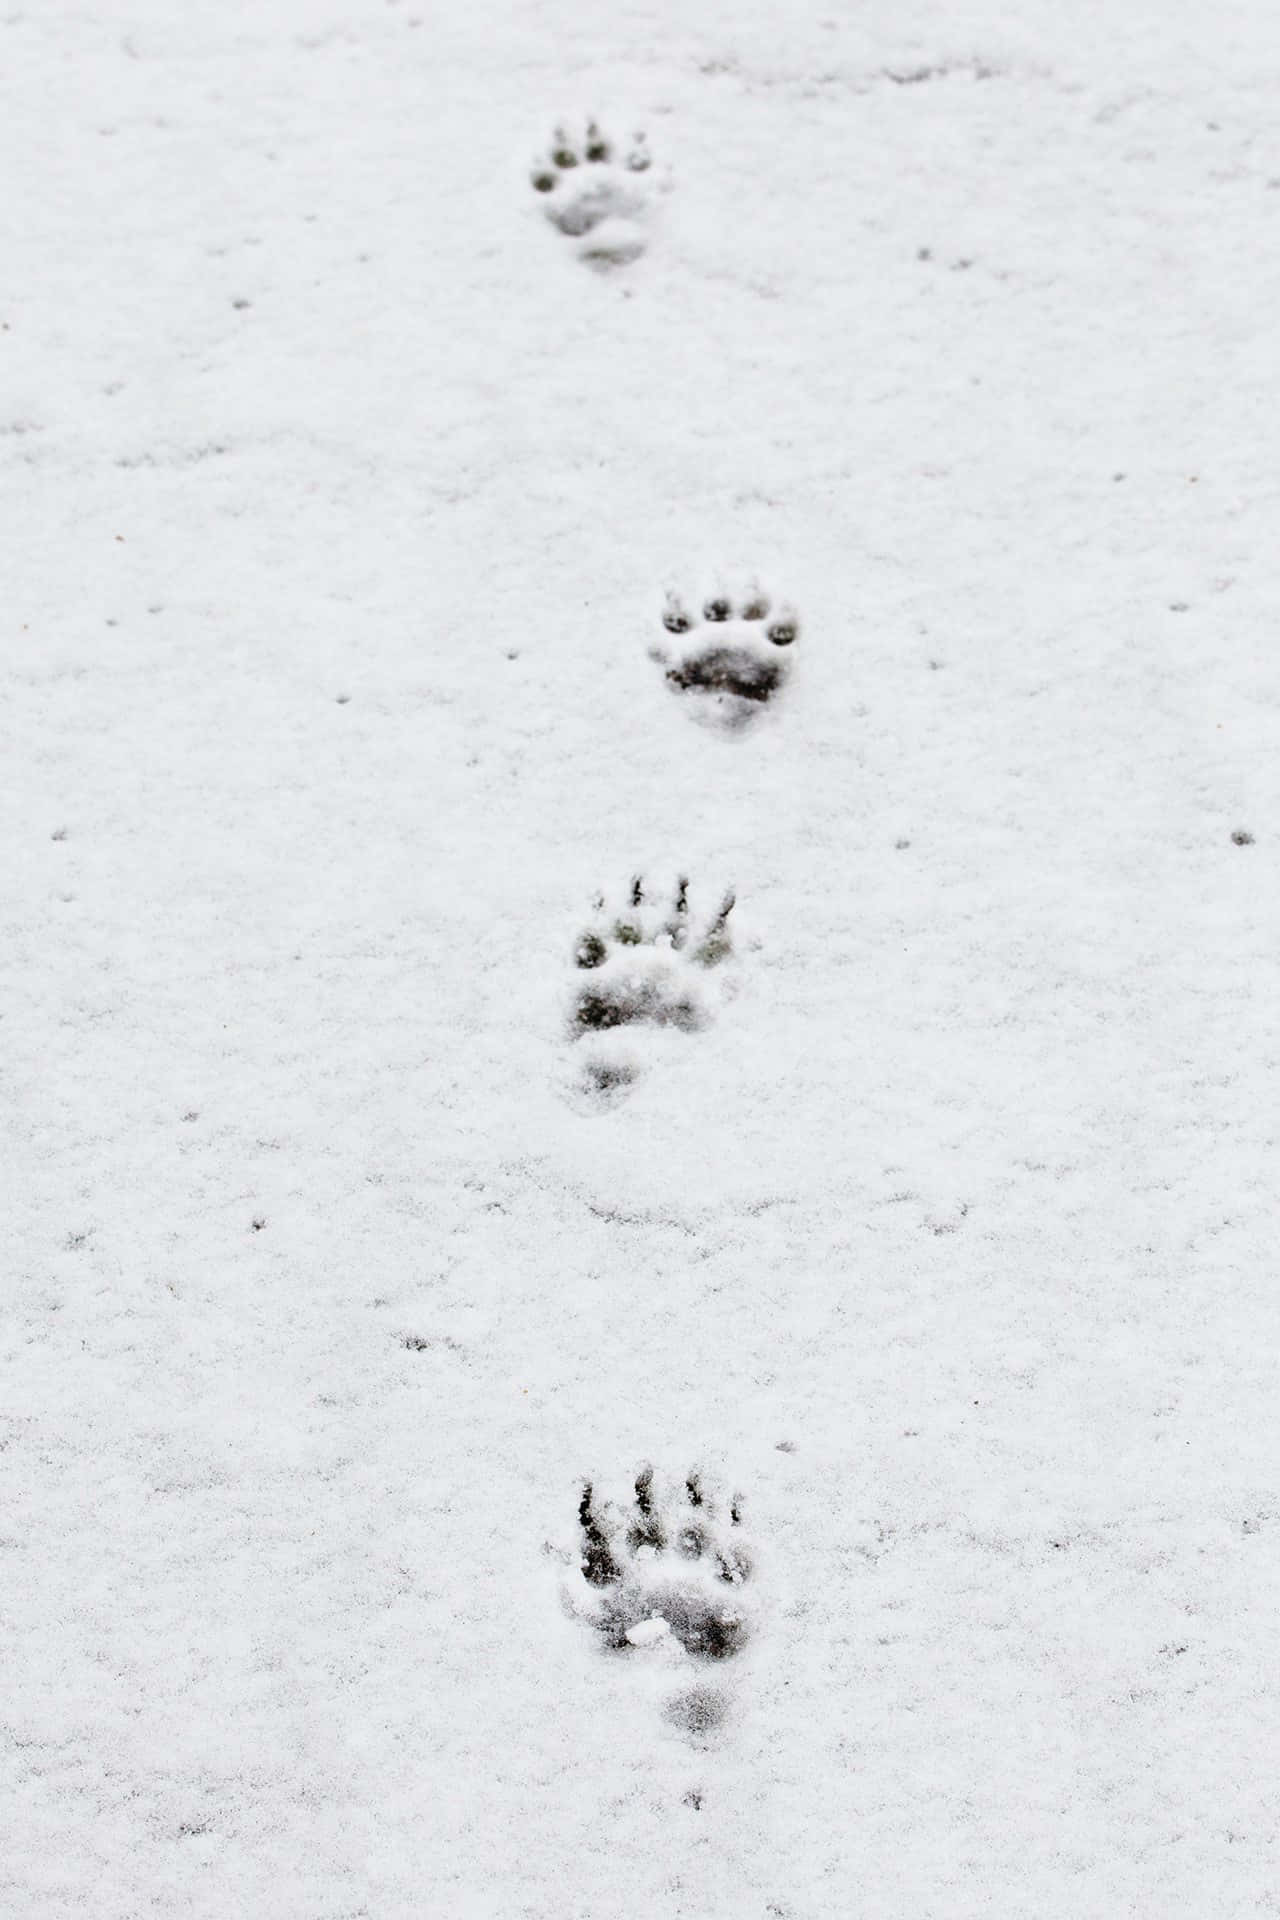 A Pair Of Paw Prints In The Snow